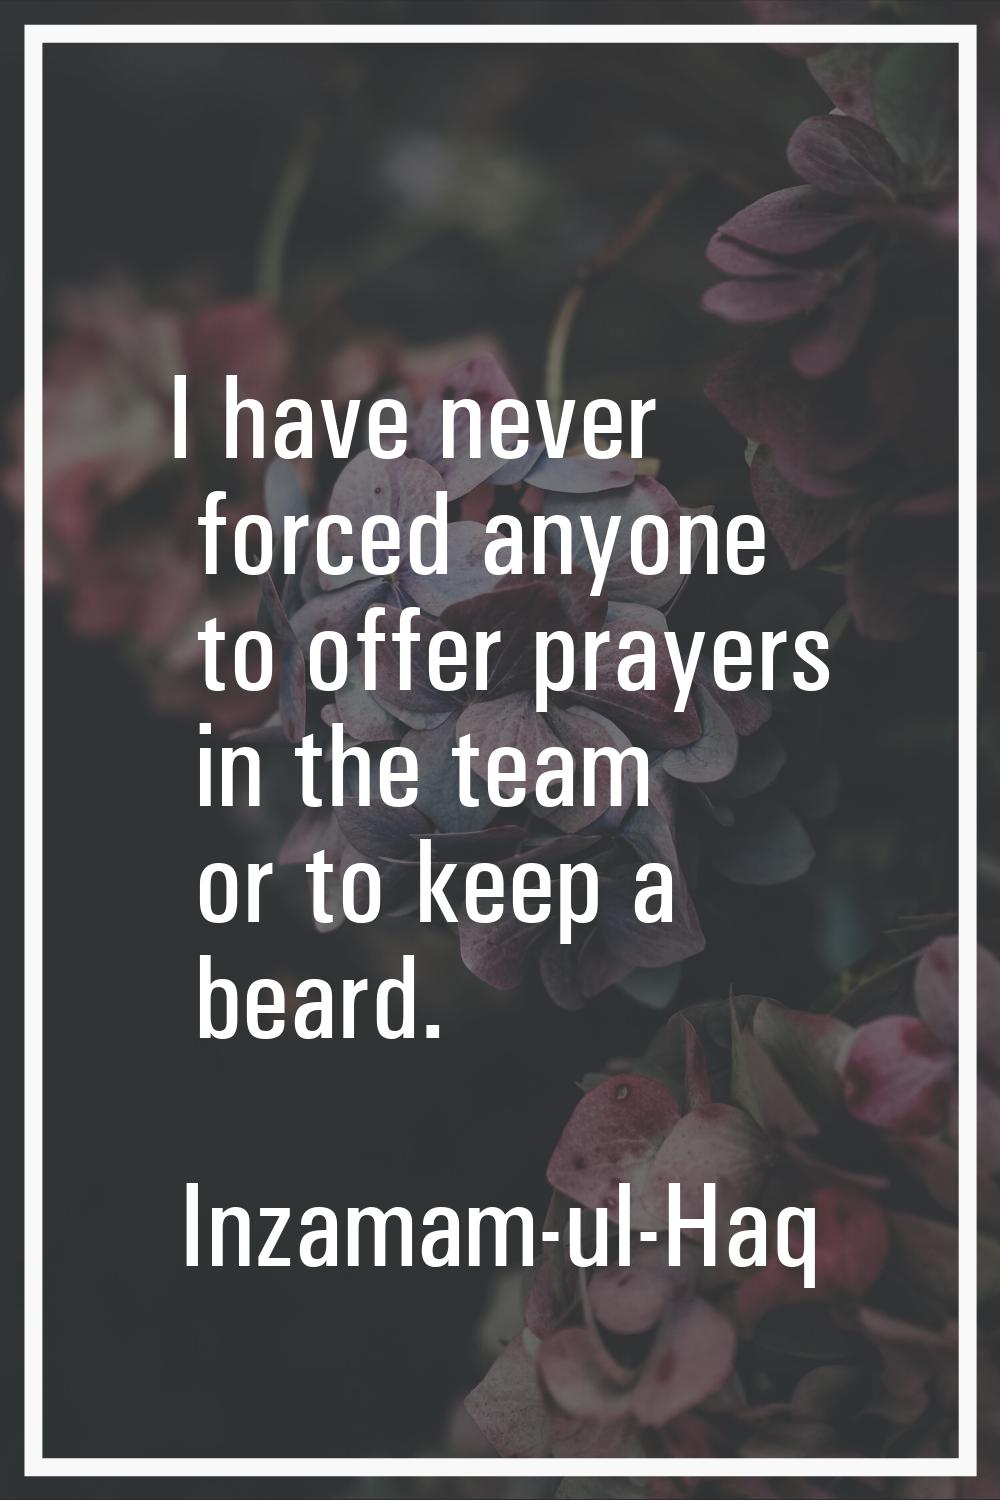 I have never forced anyone to offer prayers in the team or to keep a beard.